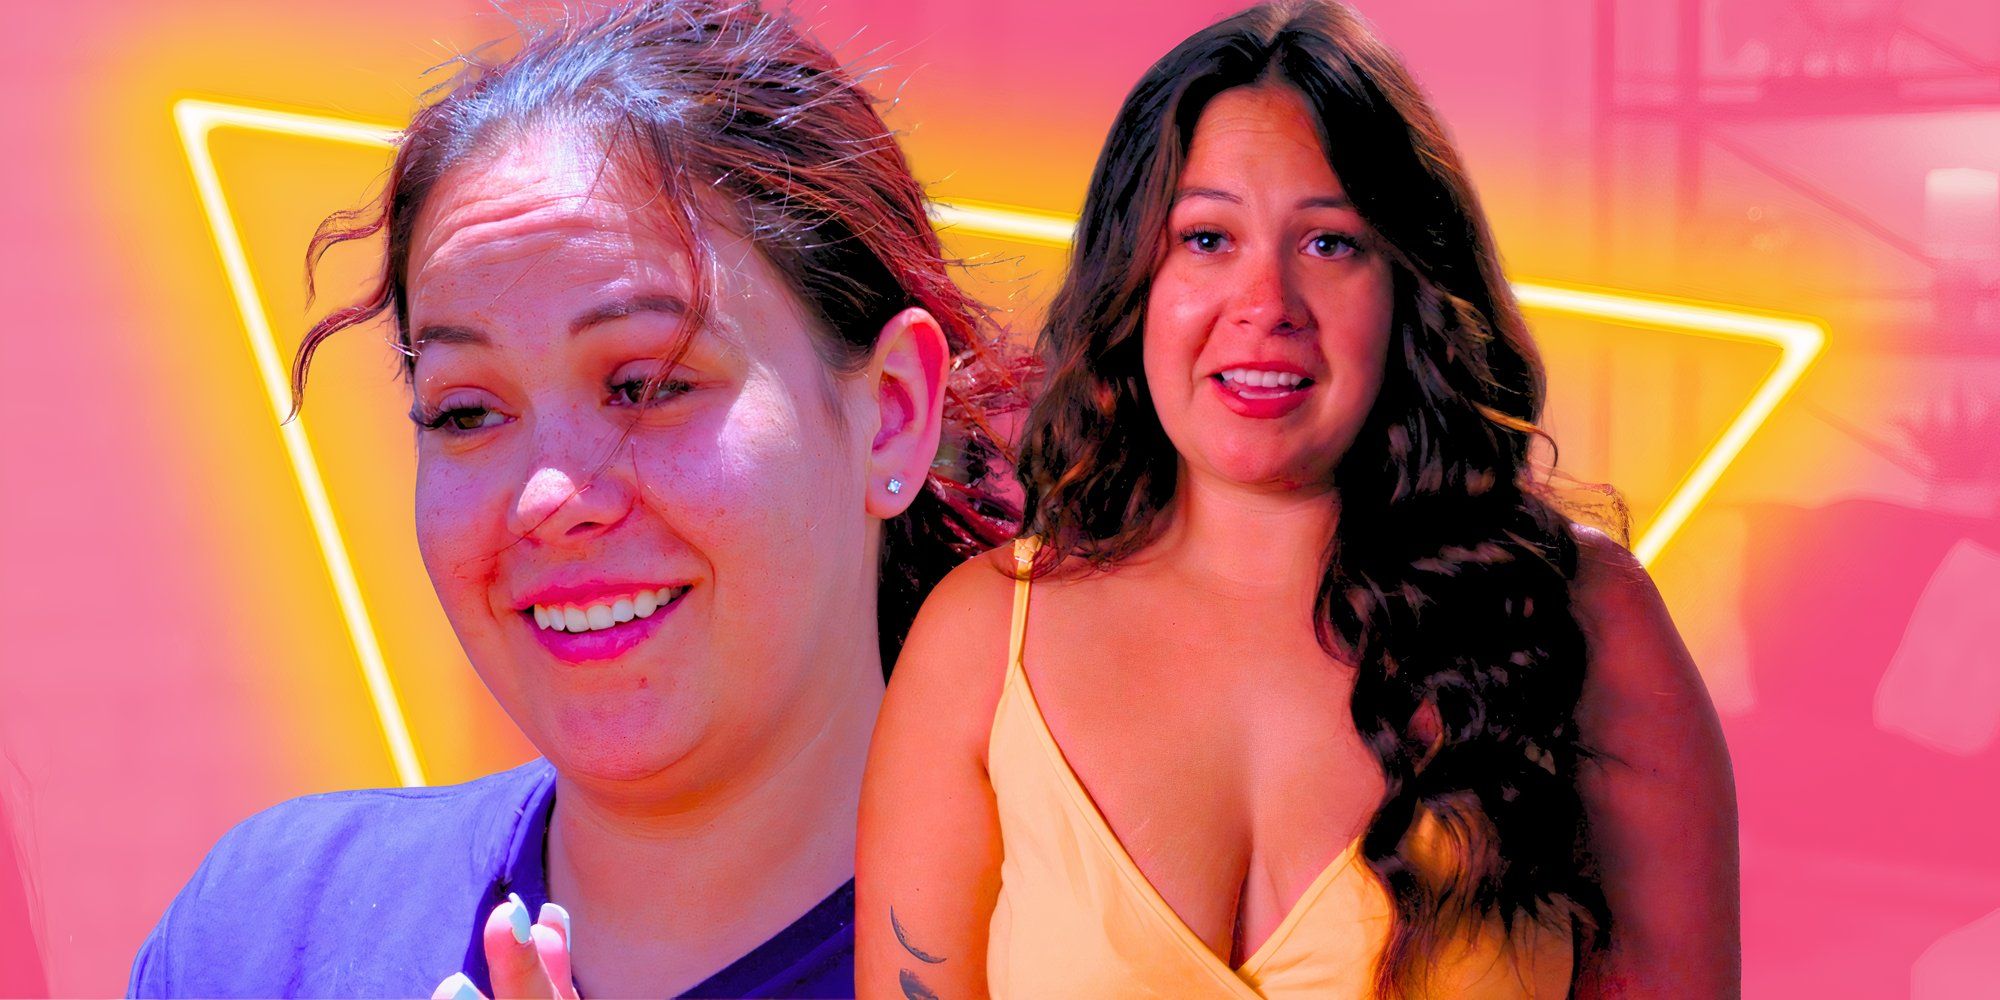 90 Day Fiancé's Liz Woods smiles in a montage image.